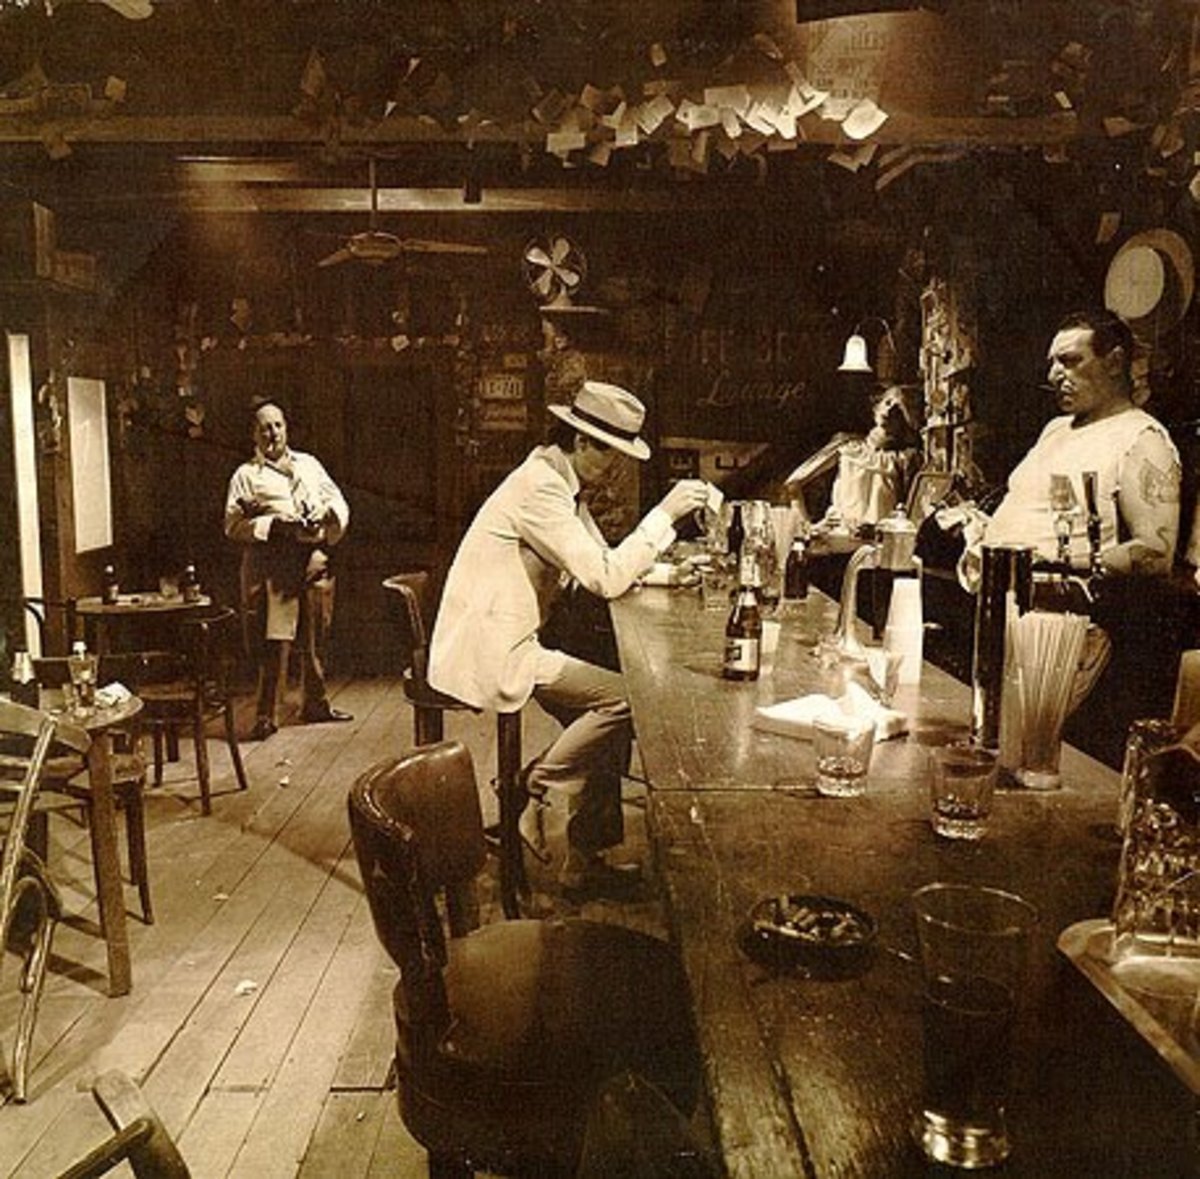 Led Zeppelin "In Through the Out Door" Back Cover A